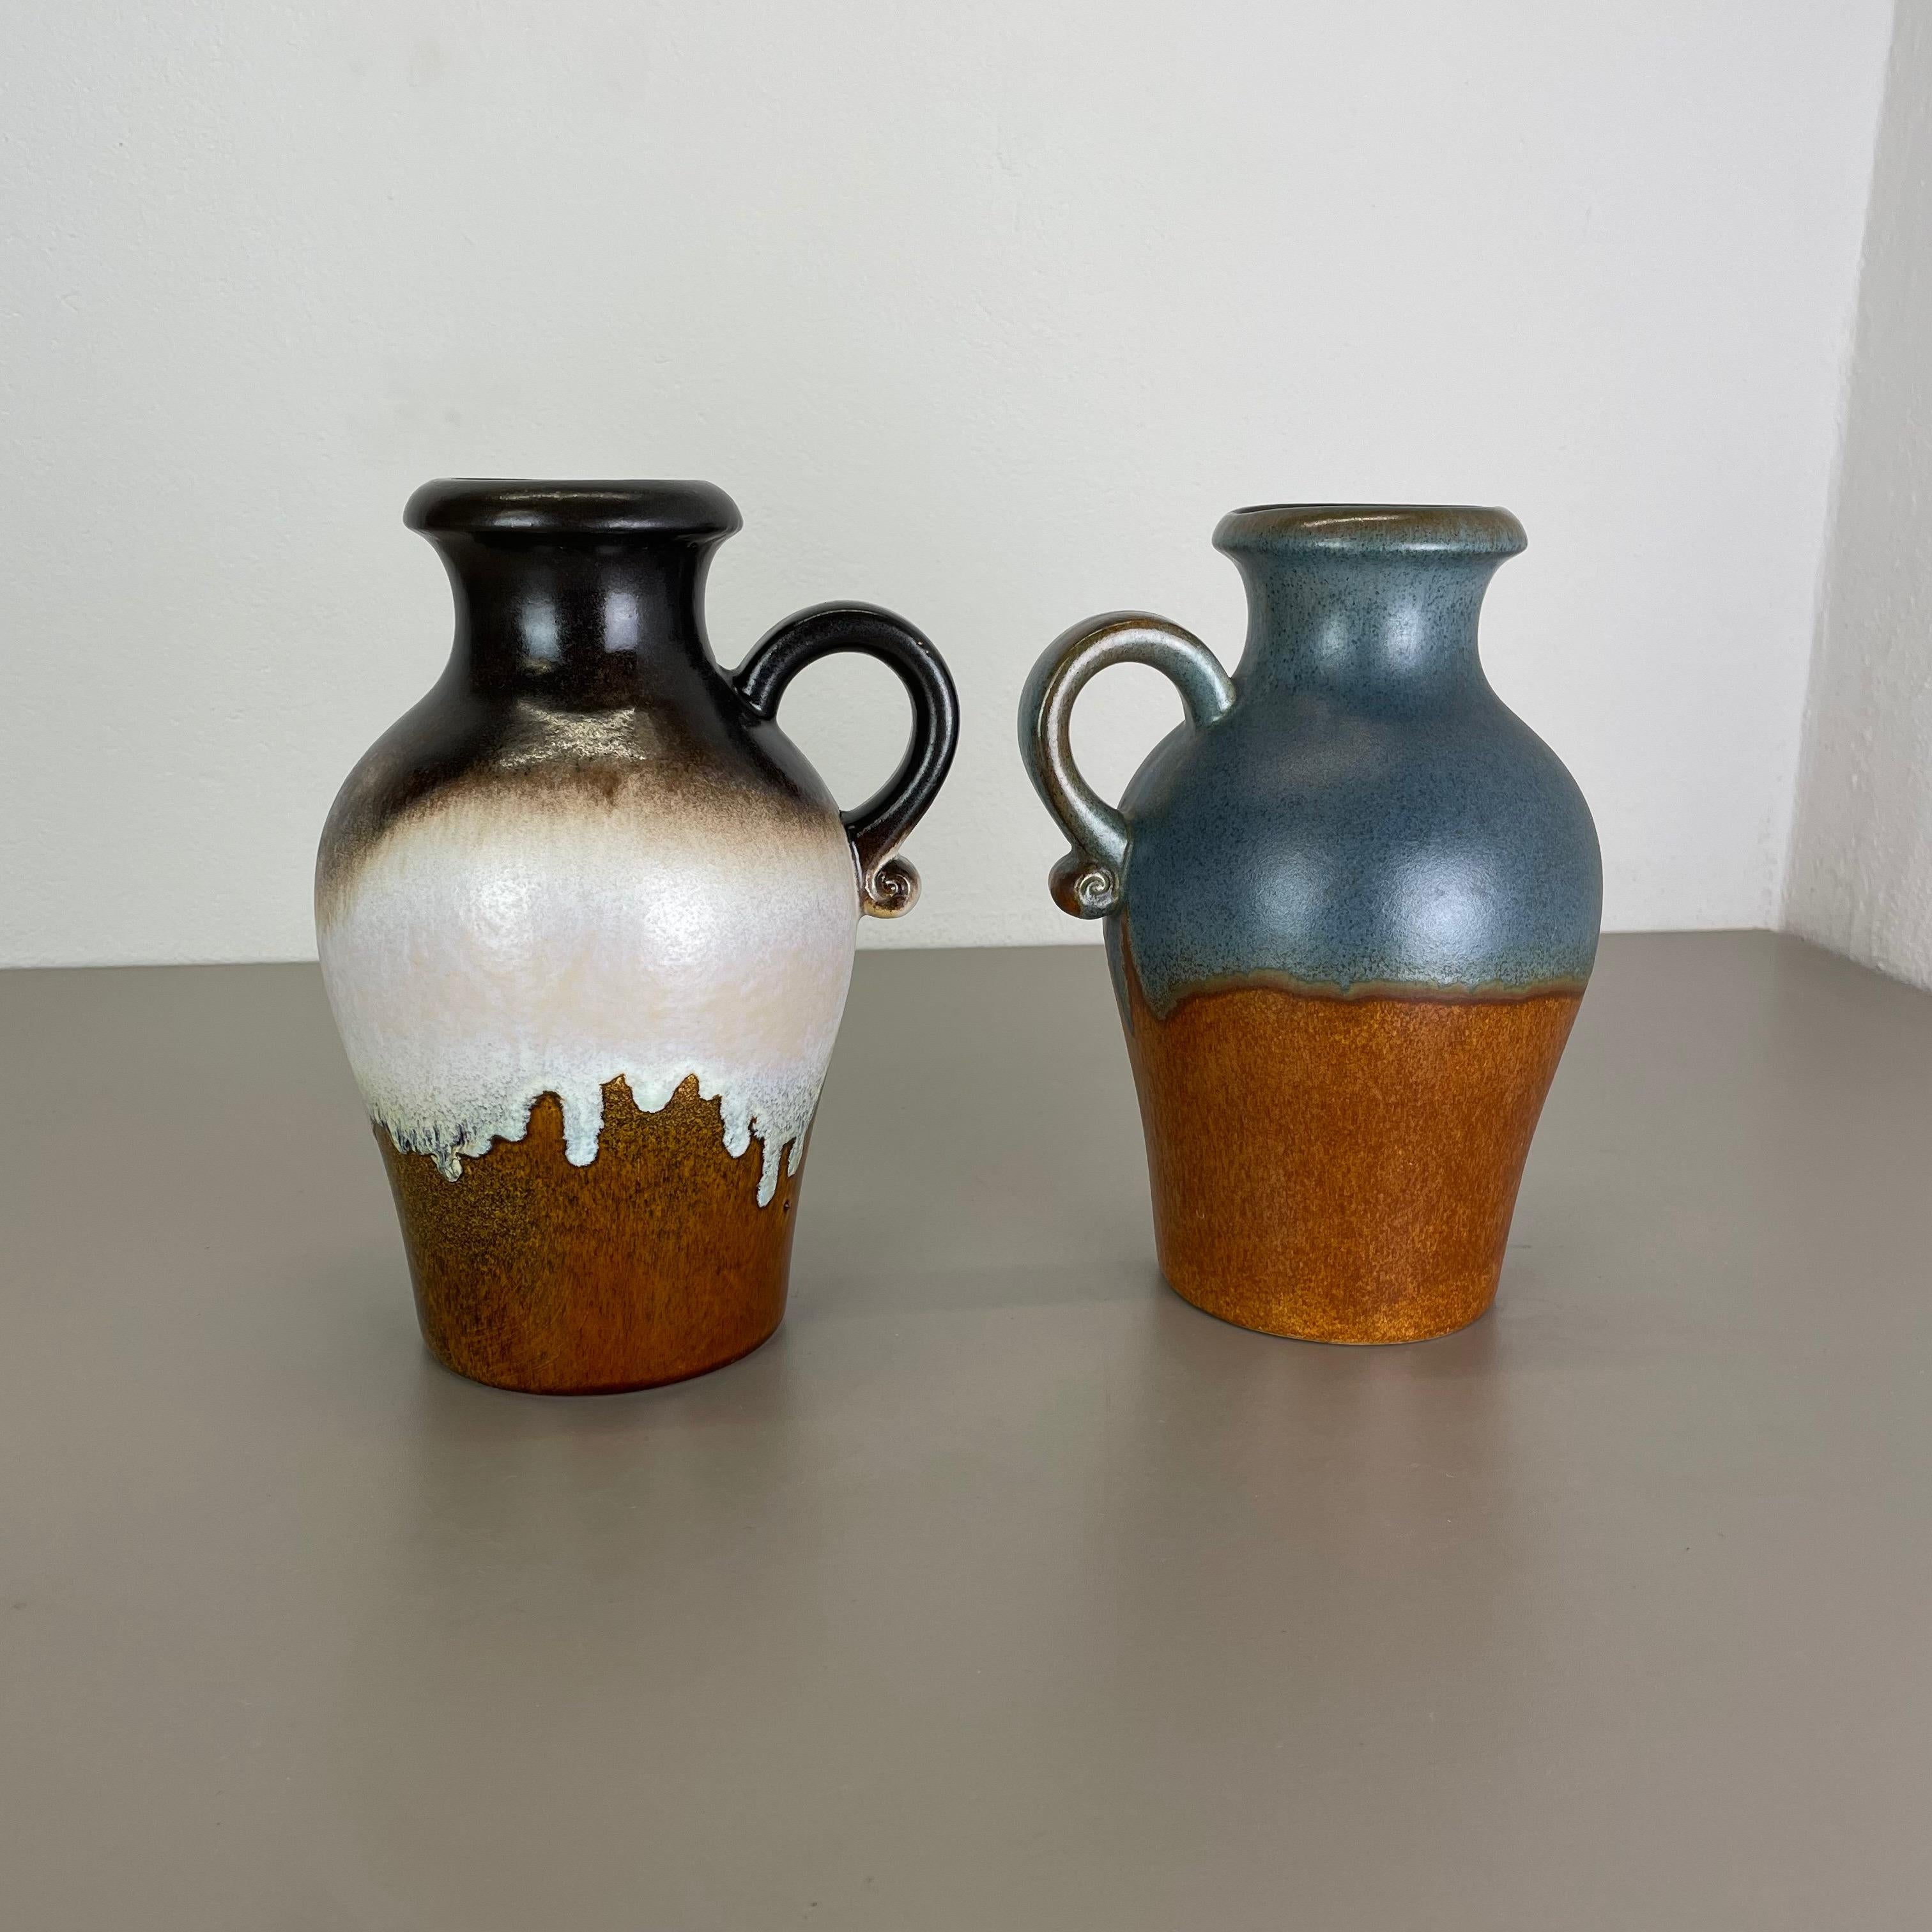 Article:

Set of two fat lava art vases


Producer:

Scheurich, Germany



Decade:

1970s




These original vintage vases was produced in the 1970s in Germany. It is made of ceramic pottery in fat lava optic. Super rare in this coloration. This set